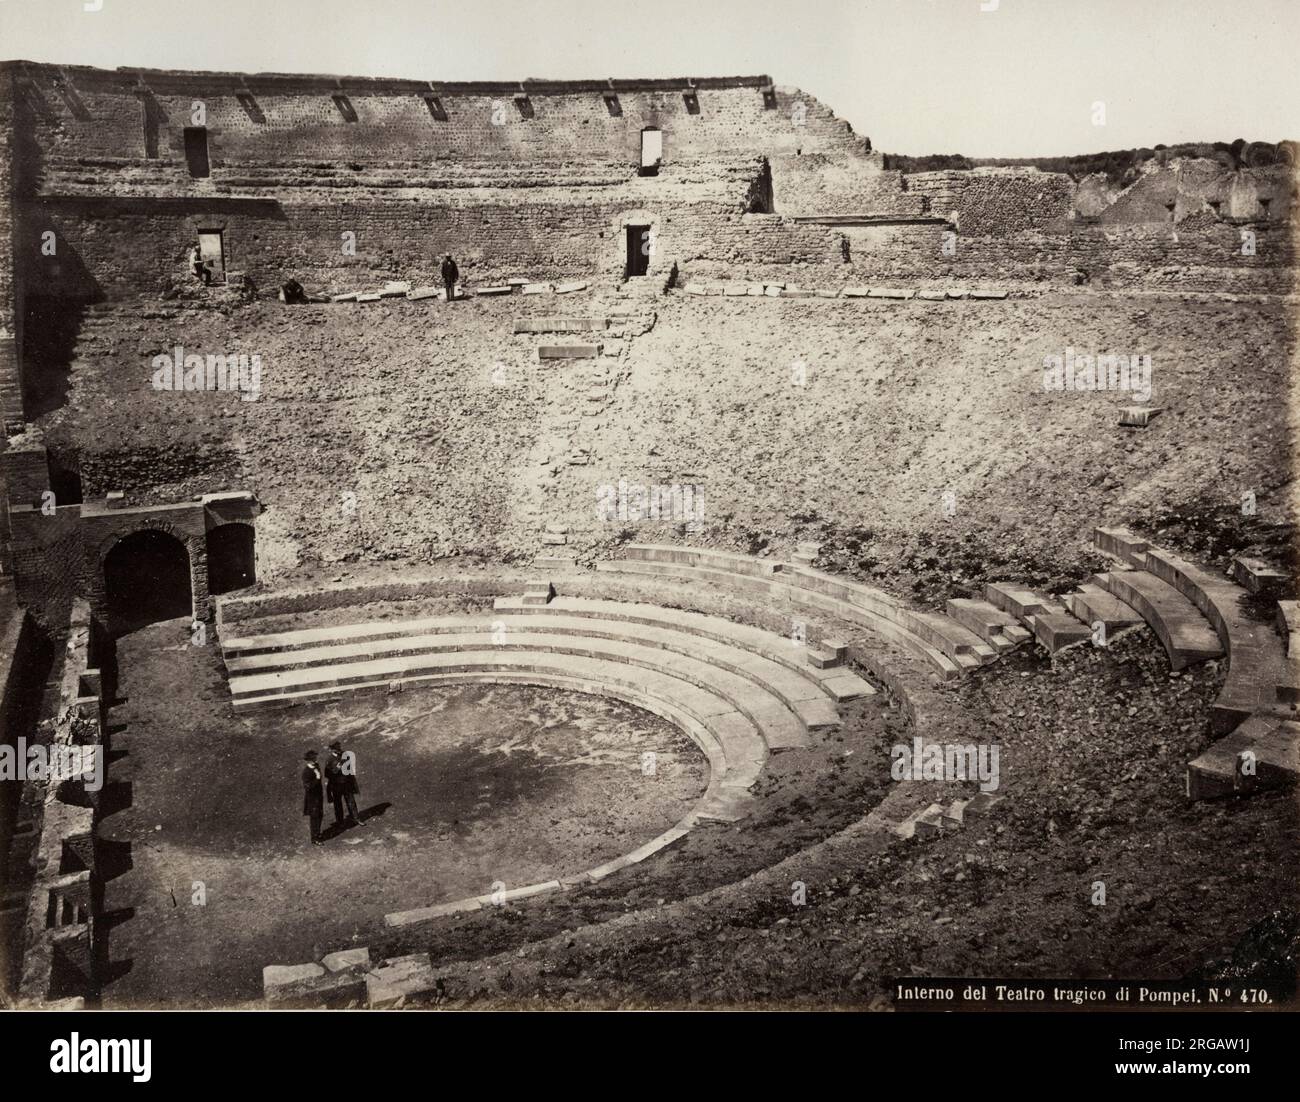 19th century vintage photograph - internal view of the theatre at Pompeii, Italy, destroyed by the eruption of Mount Vesuvius in 79 AD Stock Photo